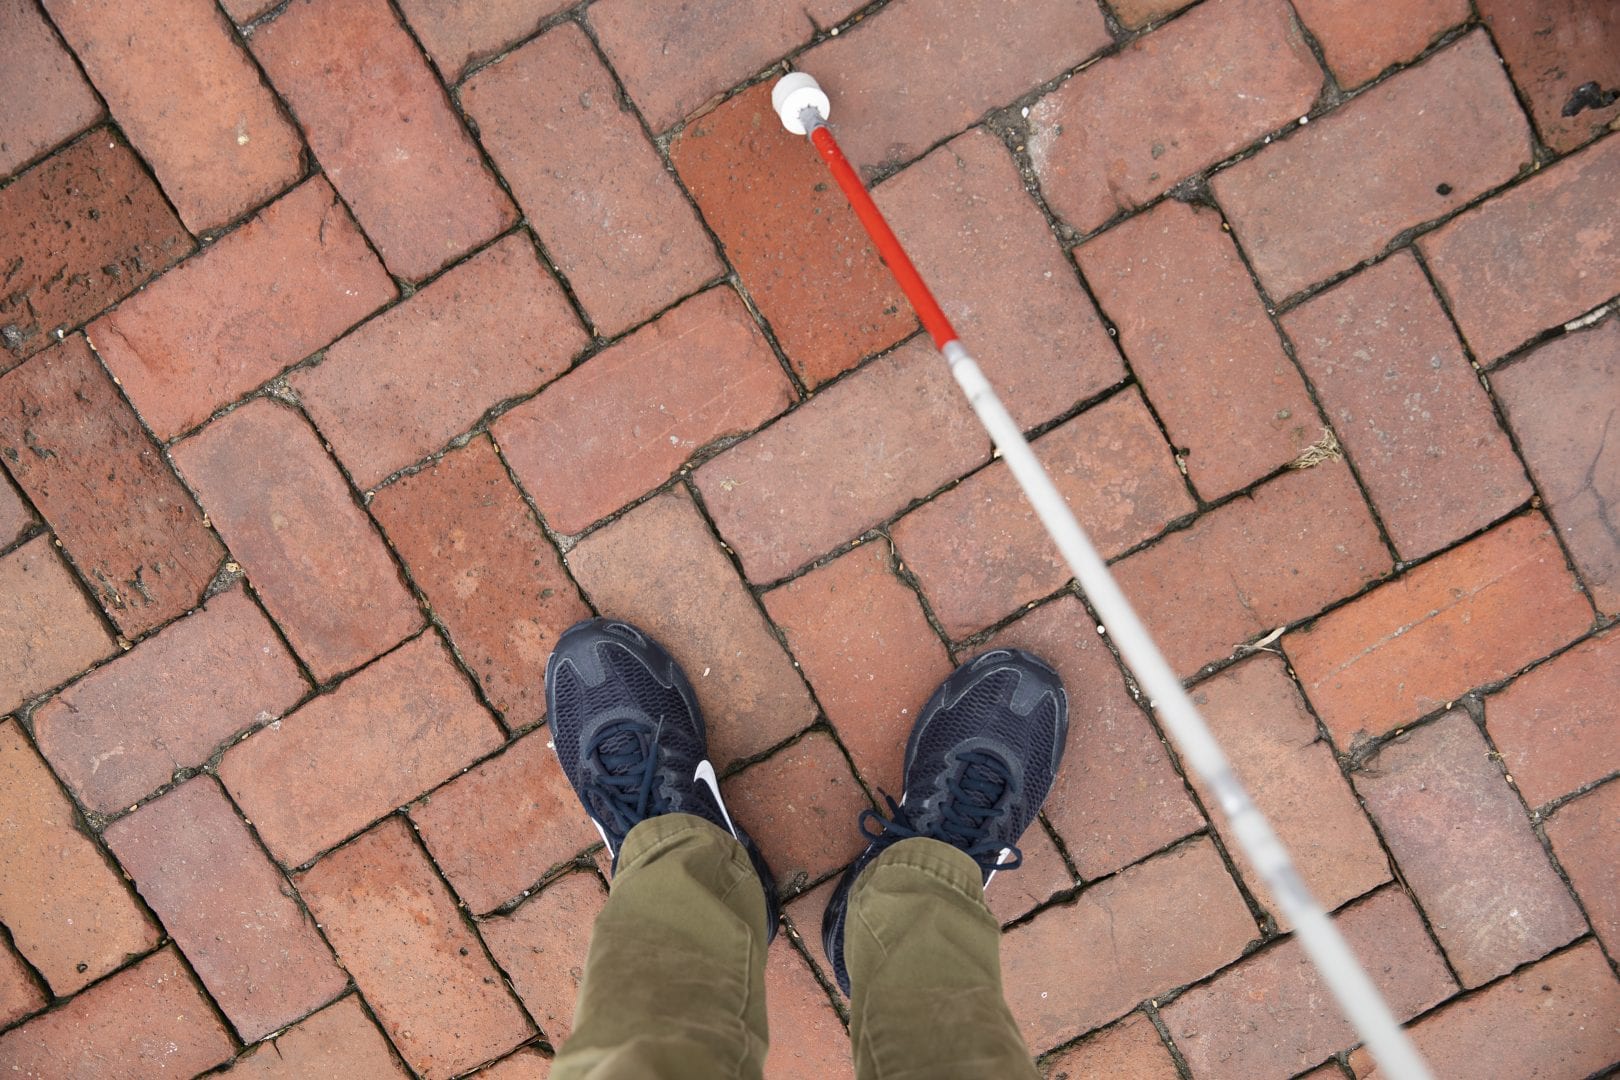 birds eye view of someone standing on a brick path with a white cane